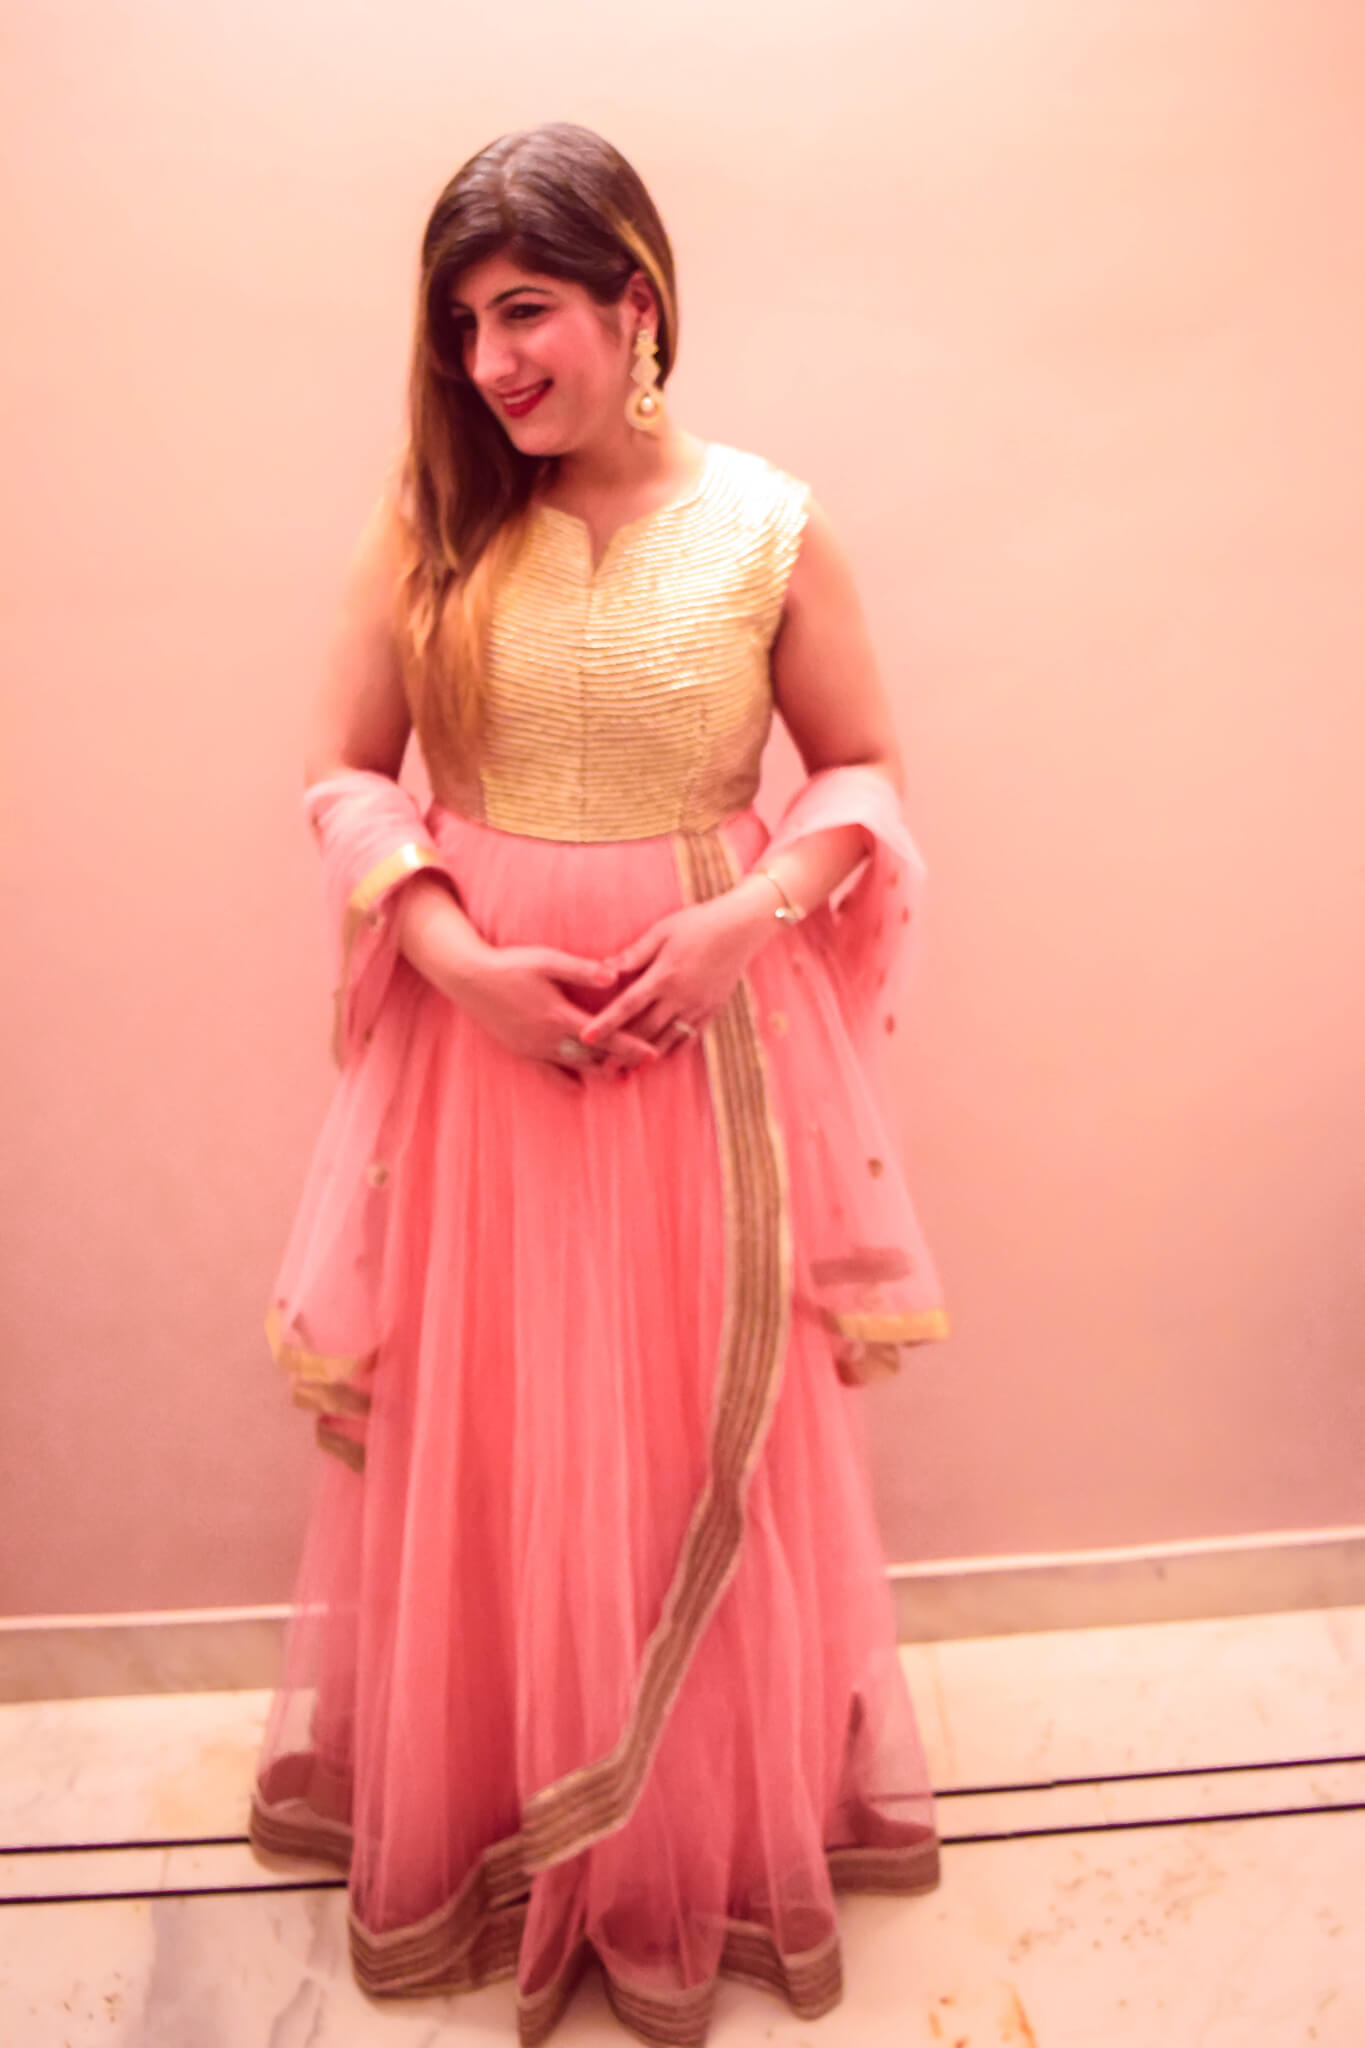 What should a Westerner wear to an Indian wedding?